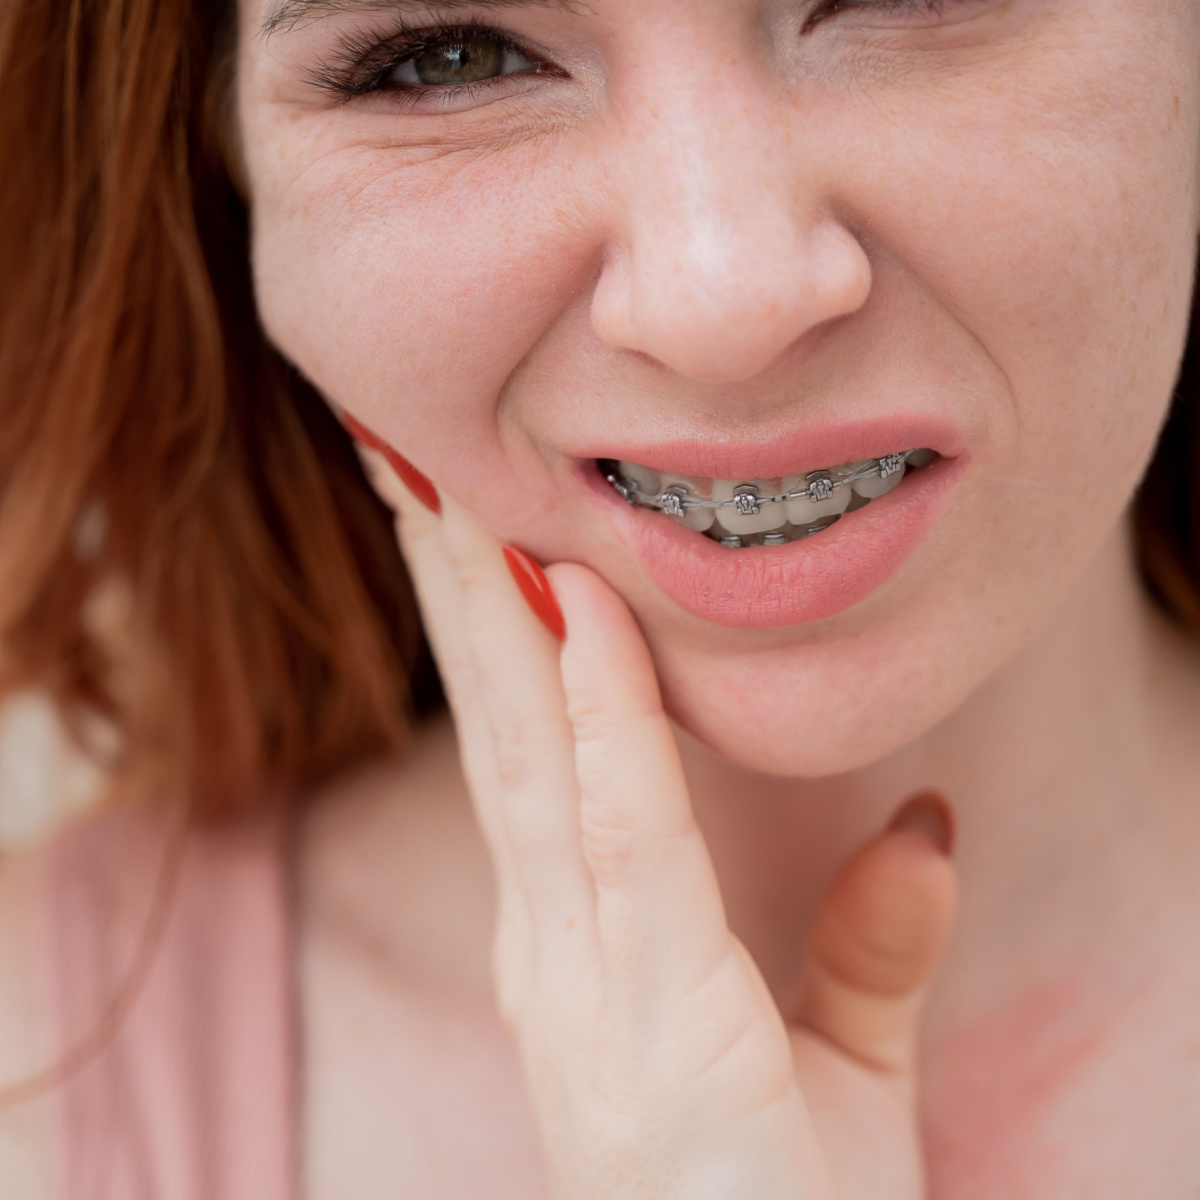 How to Deal with Discomfort from South Houston Braces